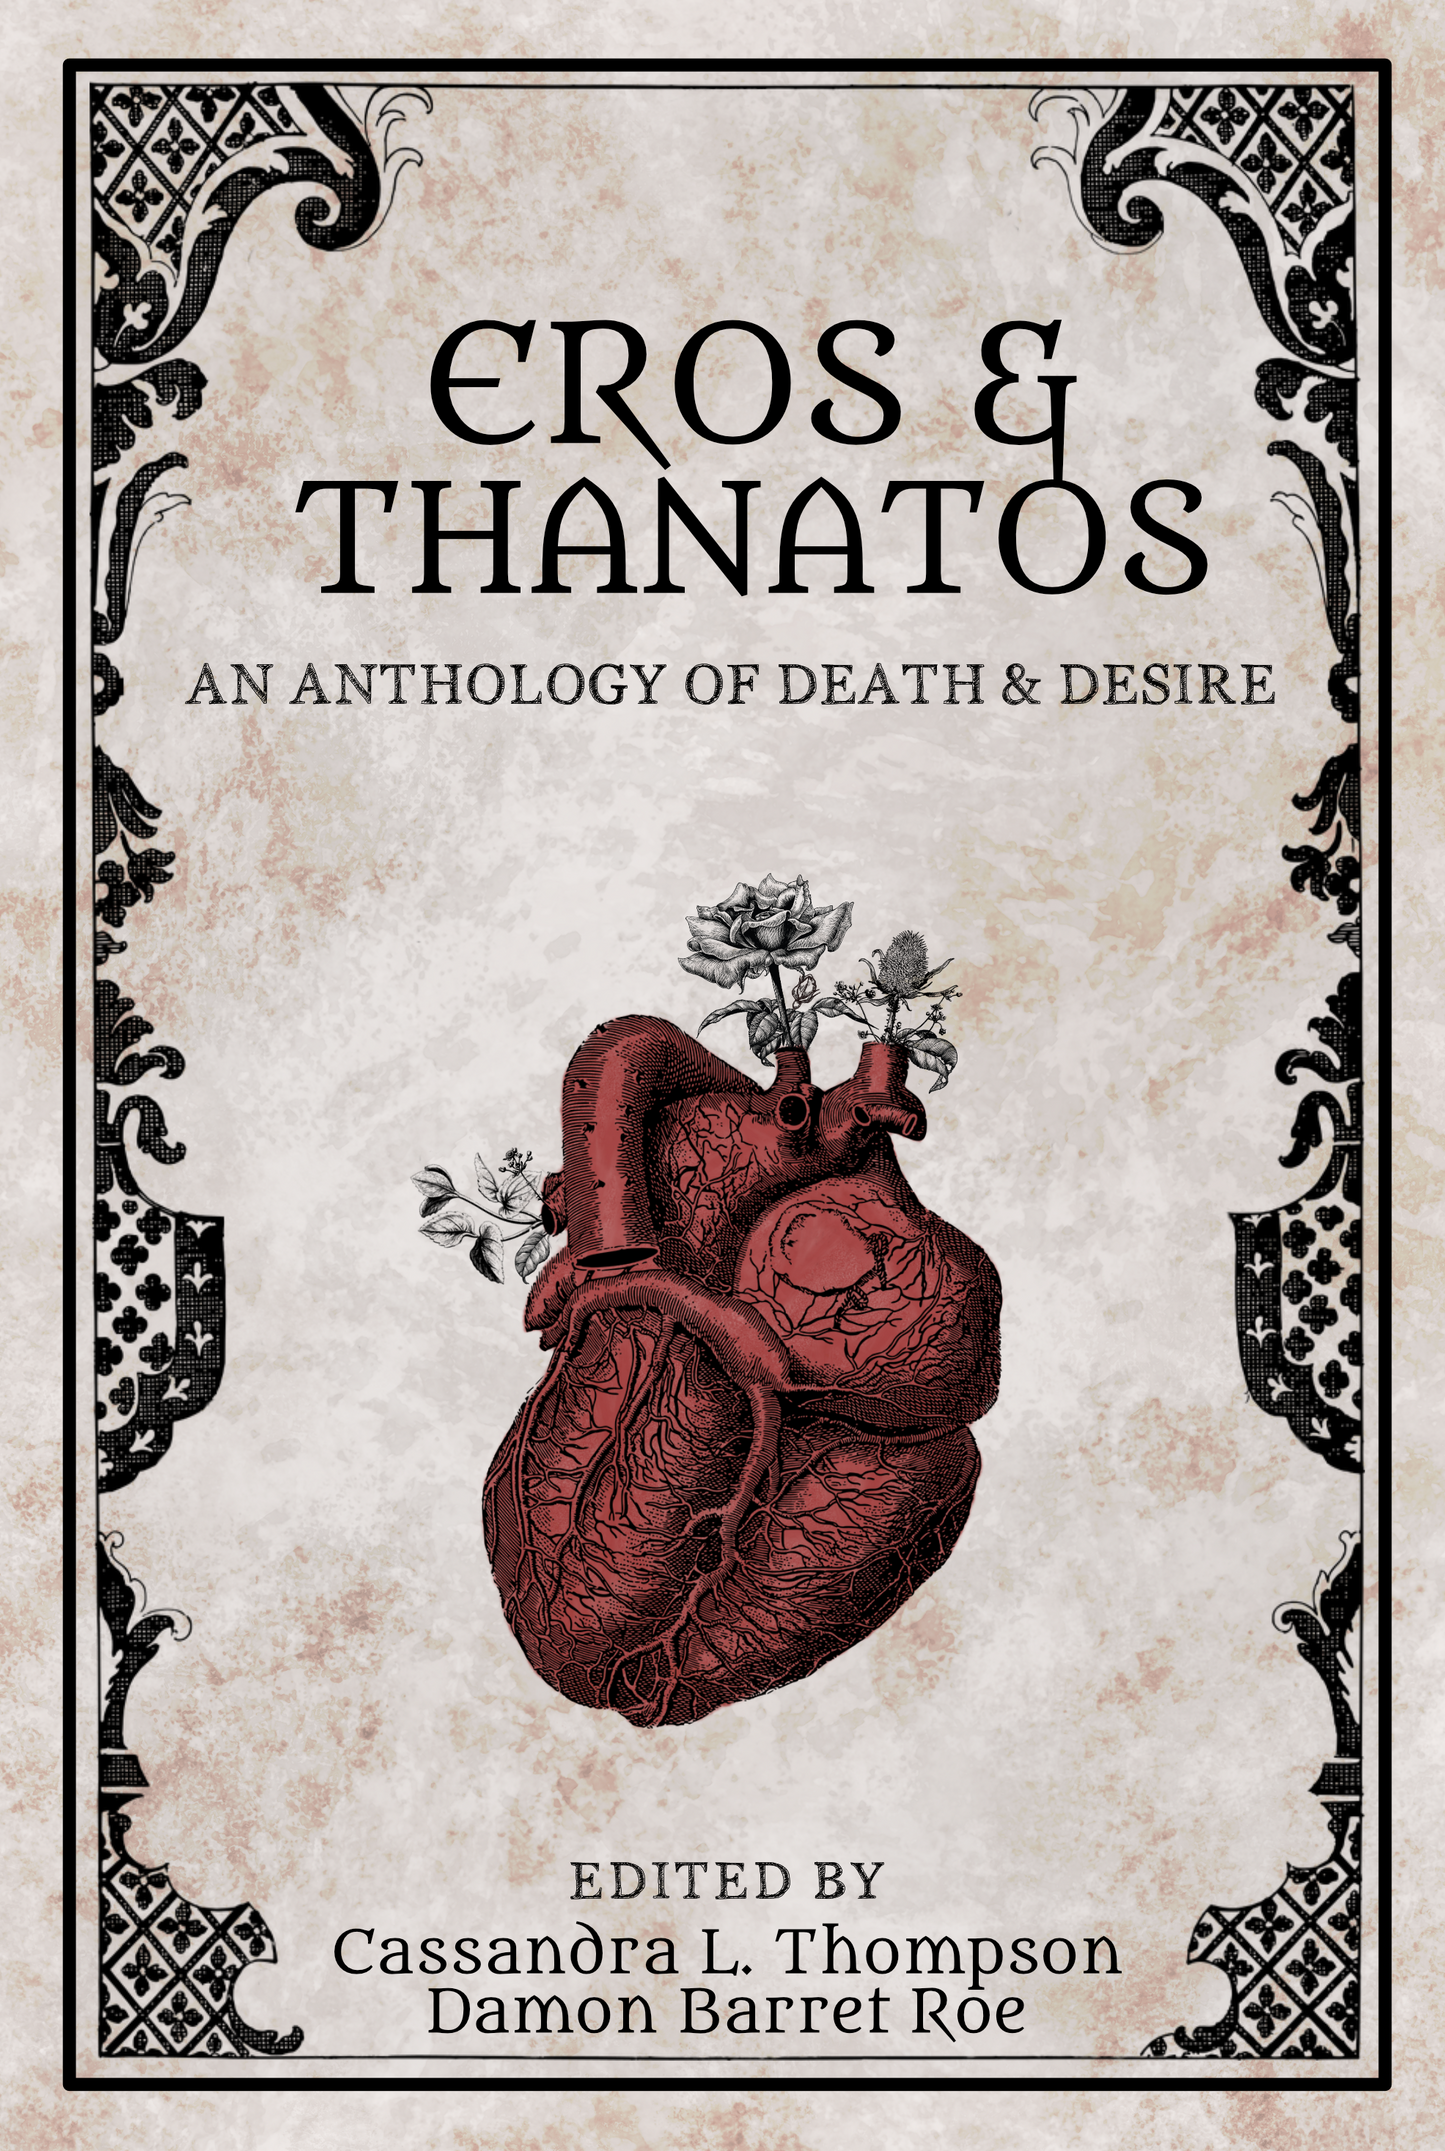 Eros & Thanatos: An Anthology of Death and Desire. Cassandra L. Thompson and Damon Barret Roe. Quill and Crow Publishing House, 2022.